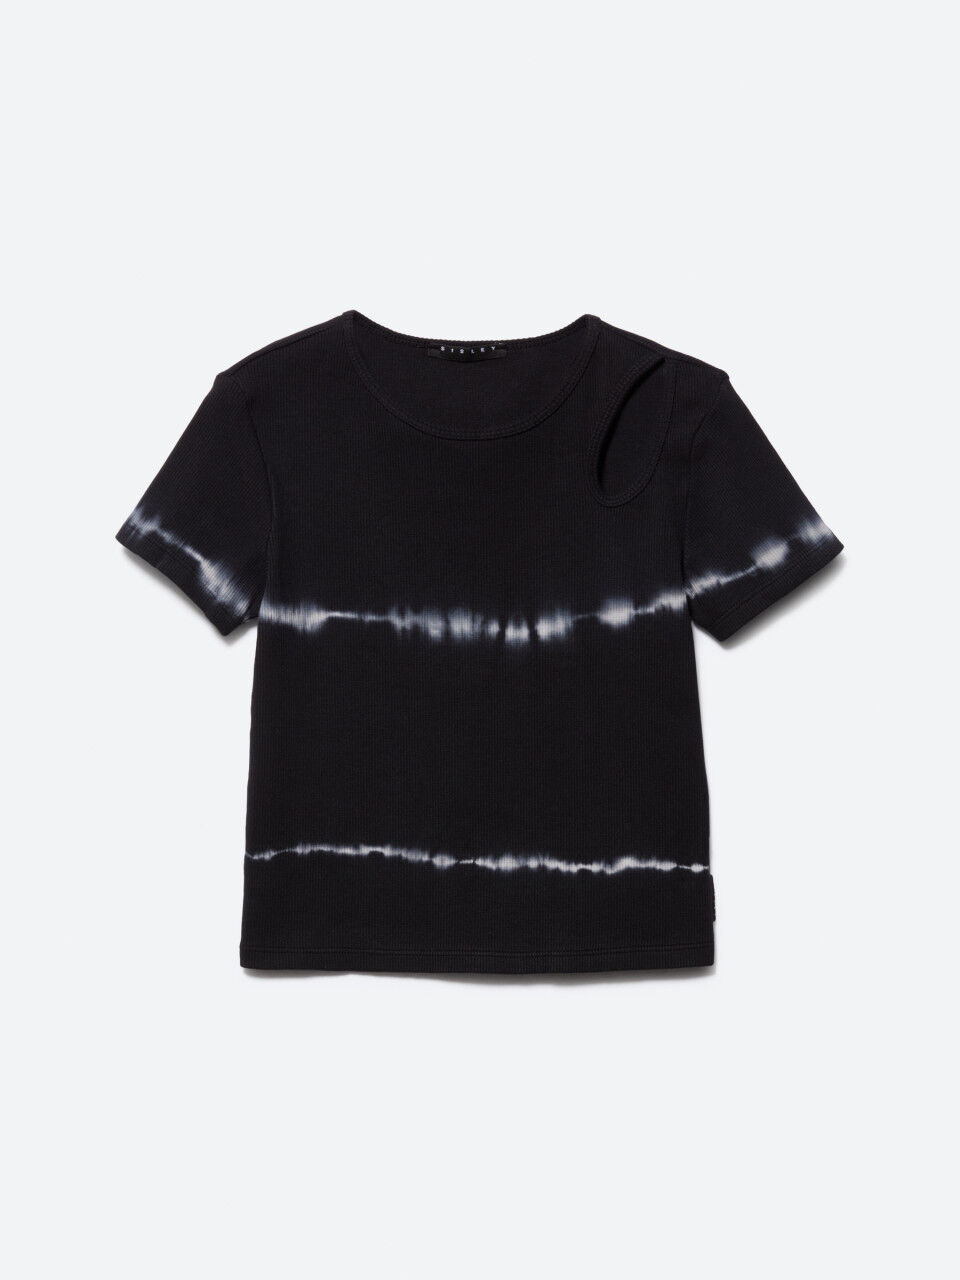 Ribbed tie-dye t-shirt with window